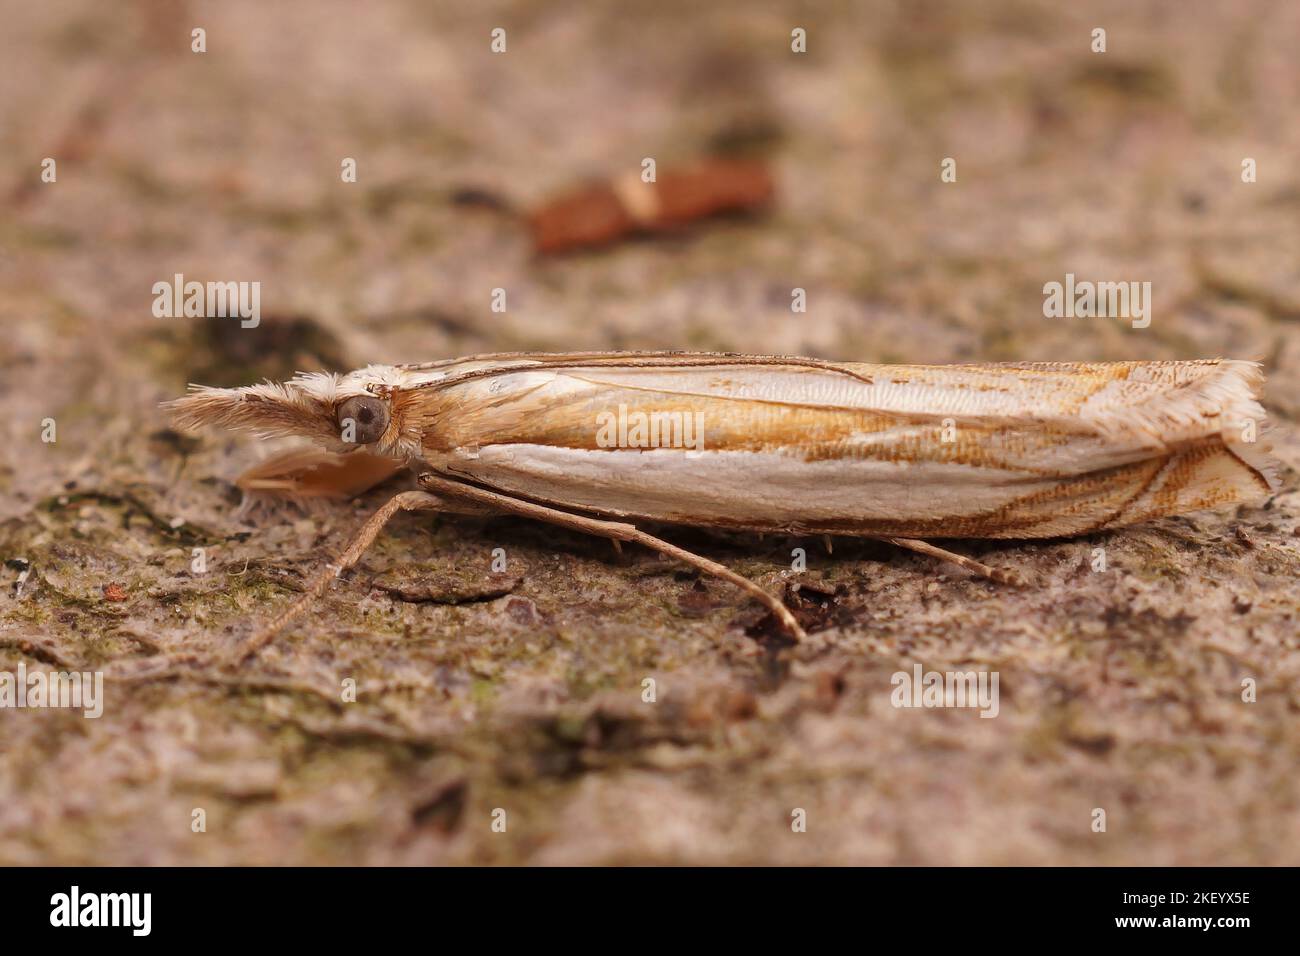 A side closeup of Crambus pascuella on the ground with blurred background Stock Photo